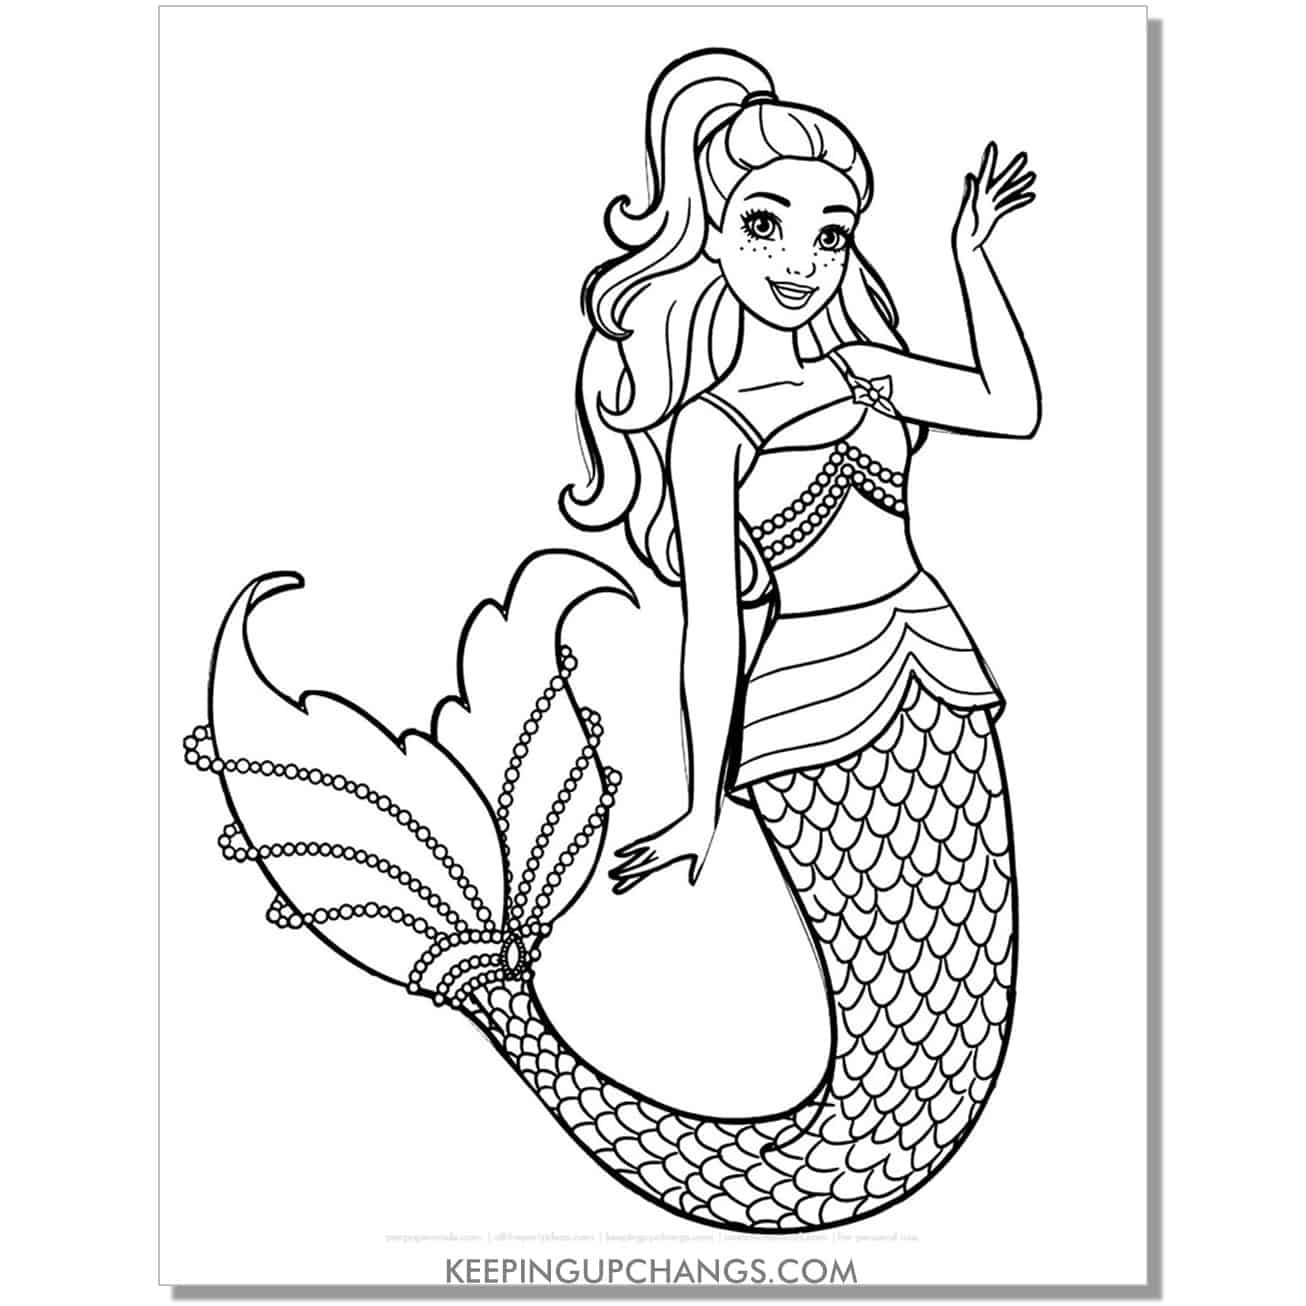 barbie mermaid with freckles coloring page.